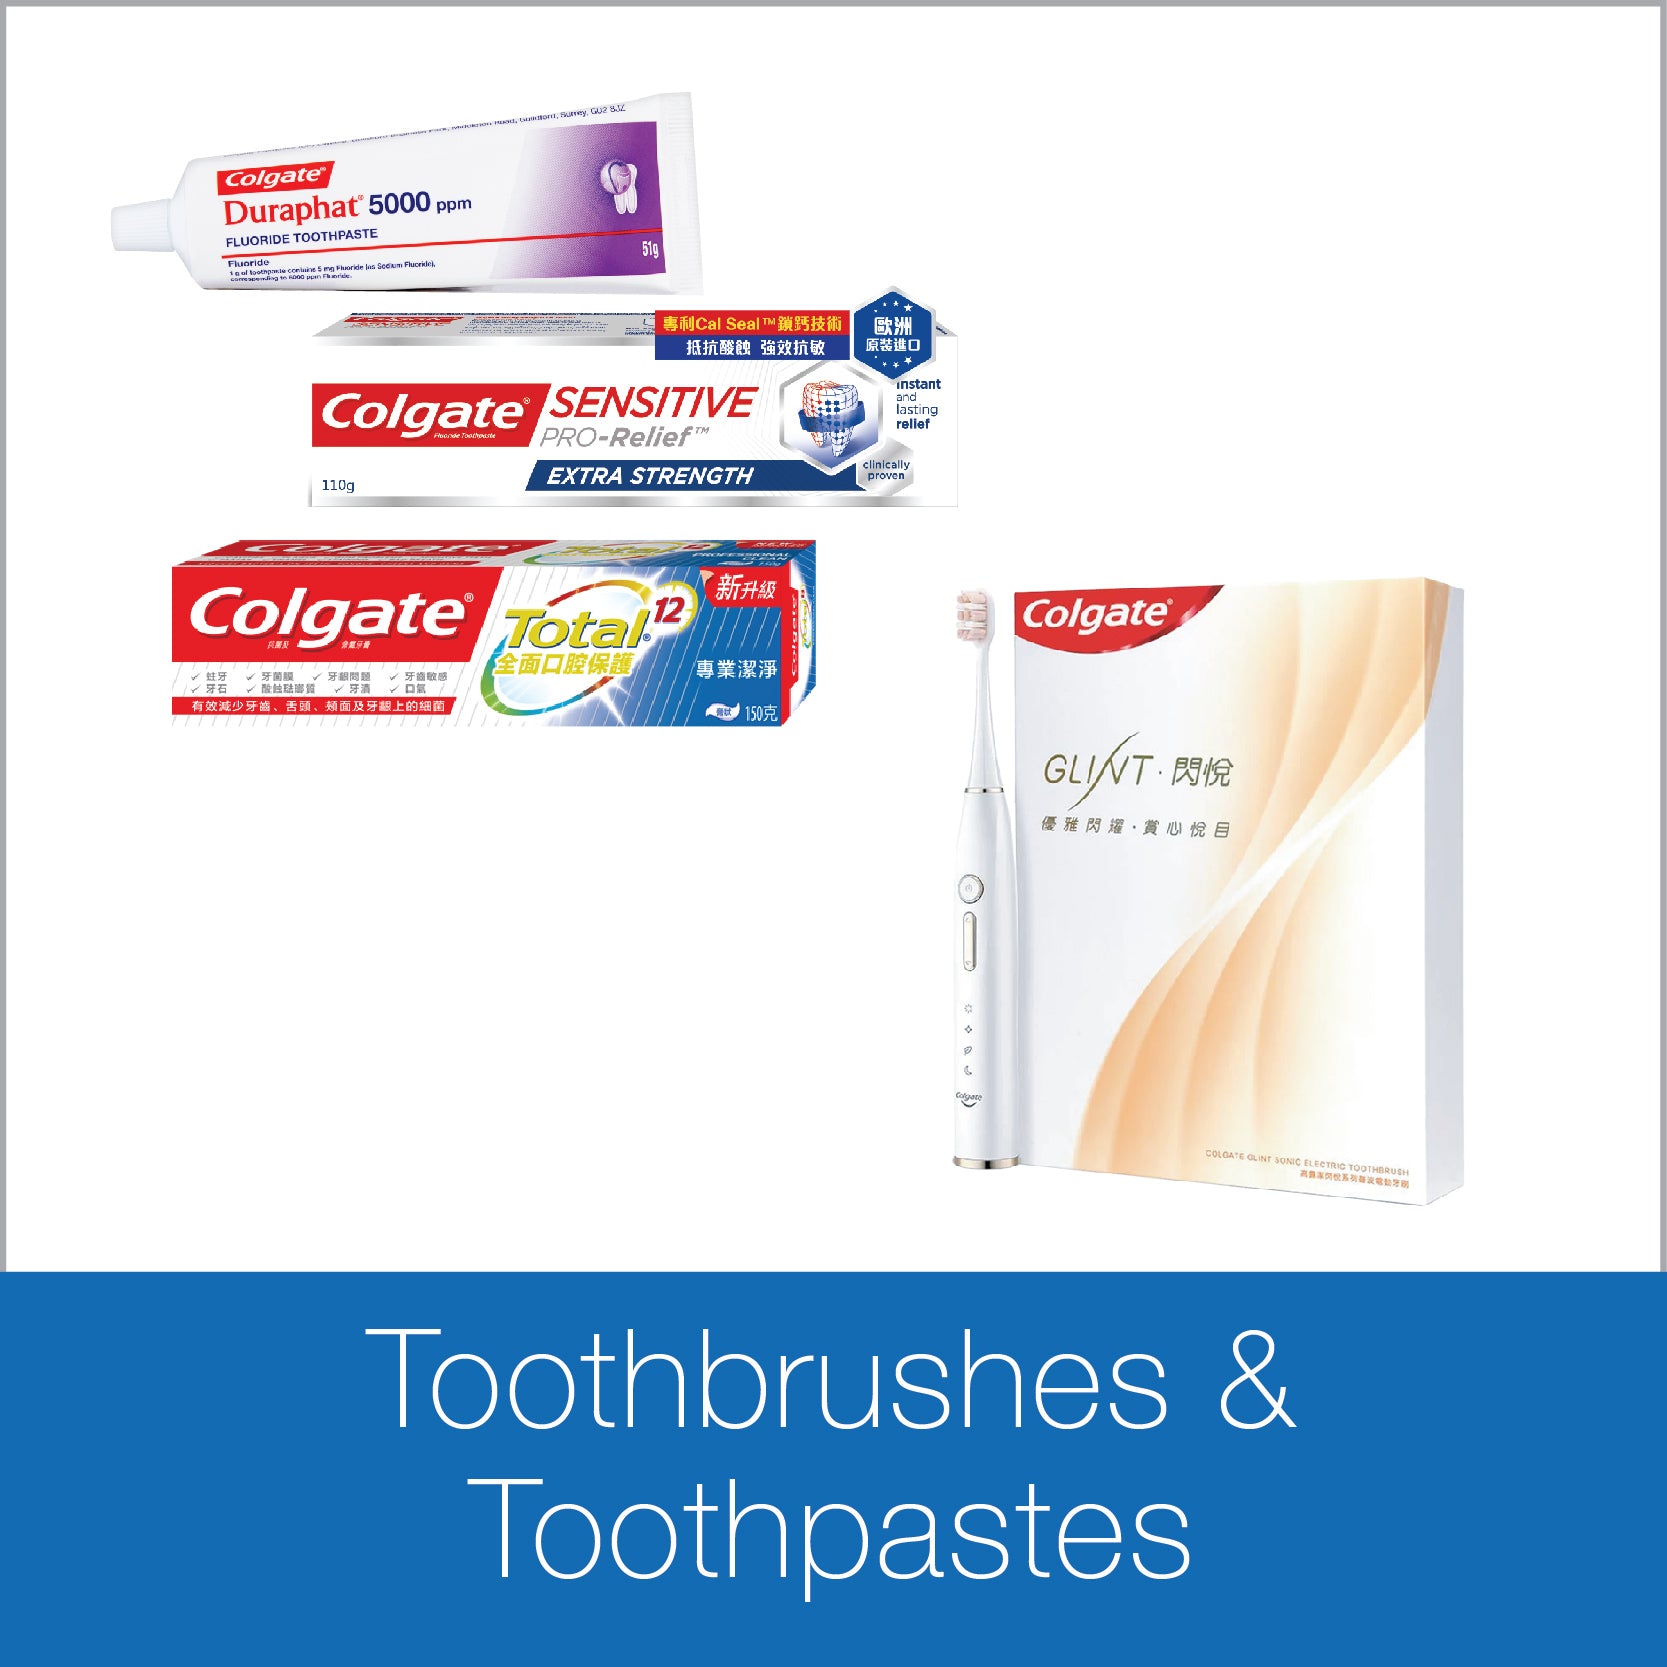 Toothbrushes & Toothpastes